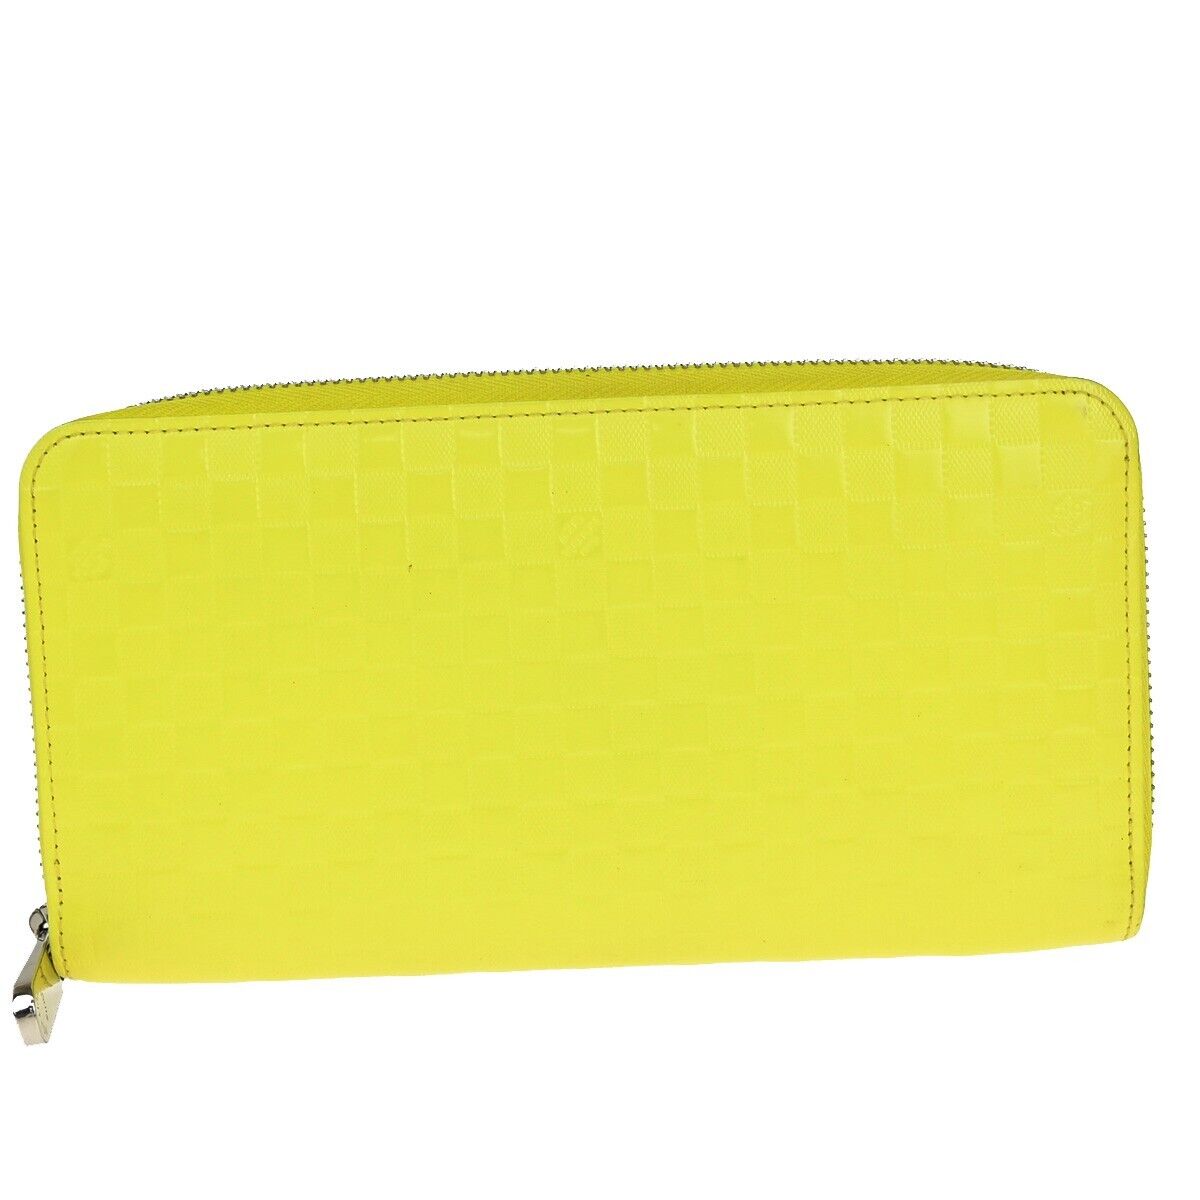 Pre-owned Louis Vuitton Portefeuille Zippy Yellow Leather Wallet  ()